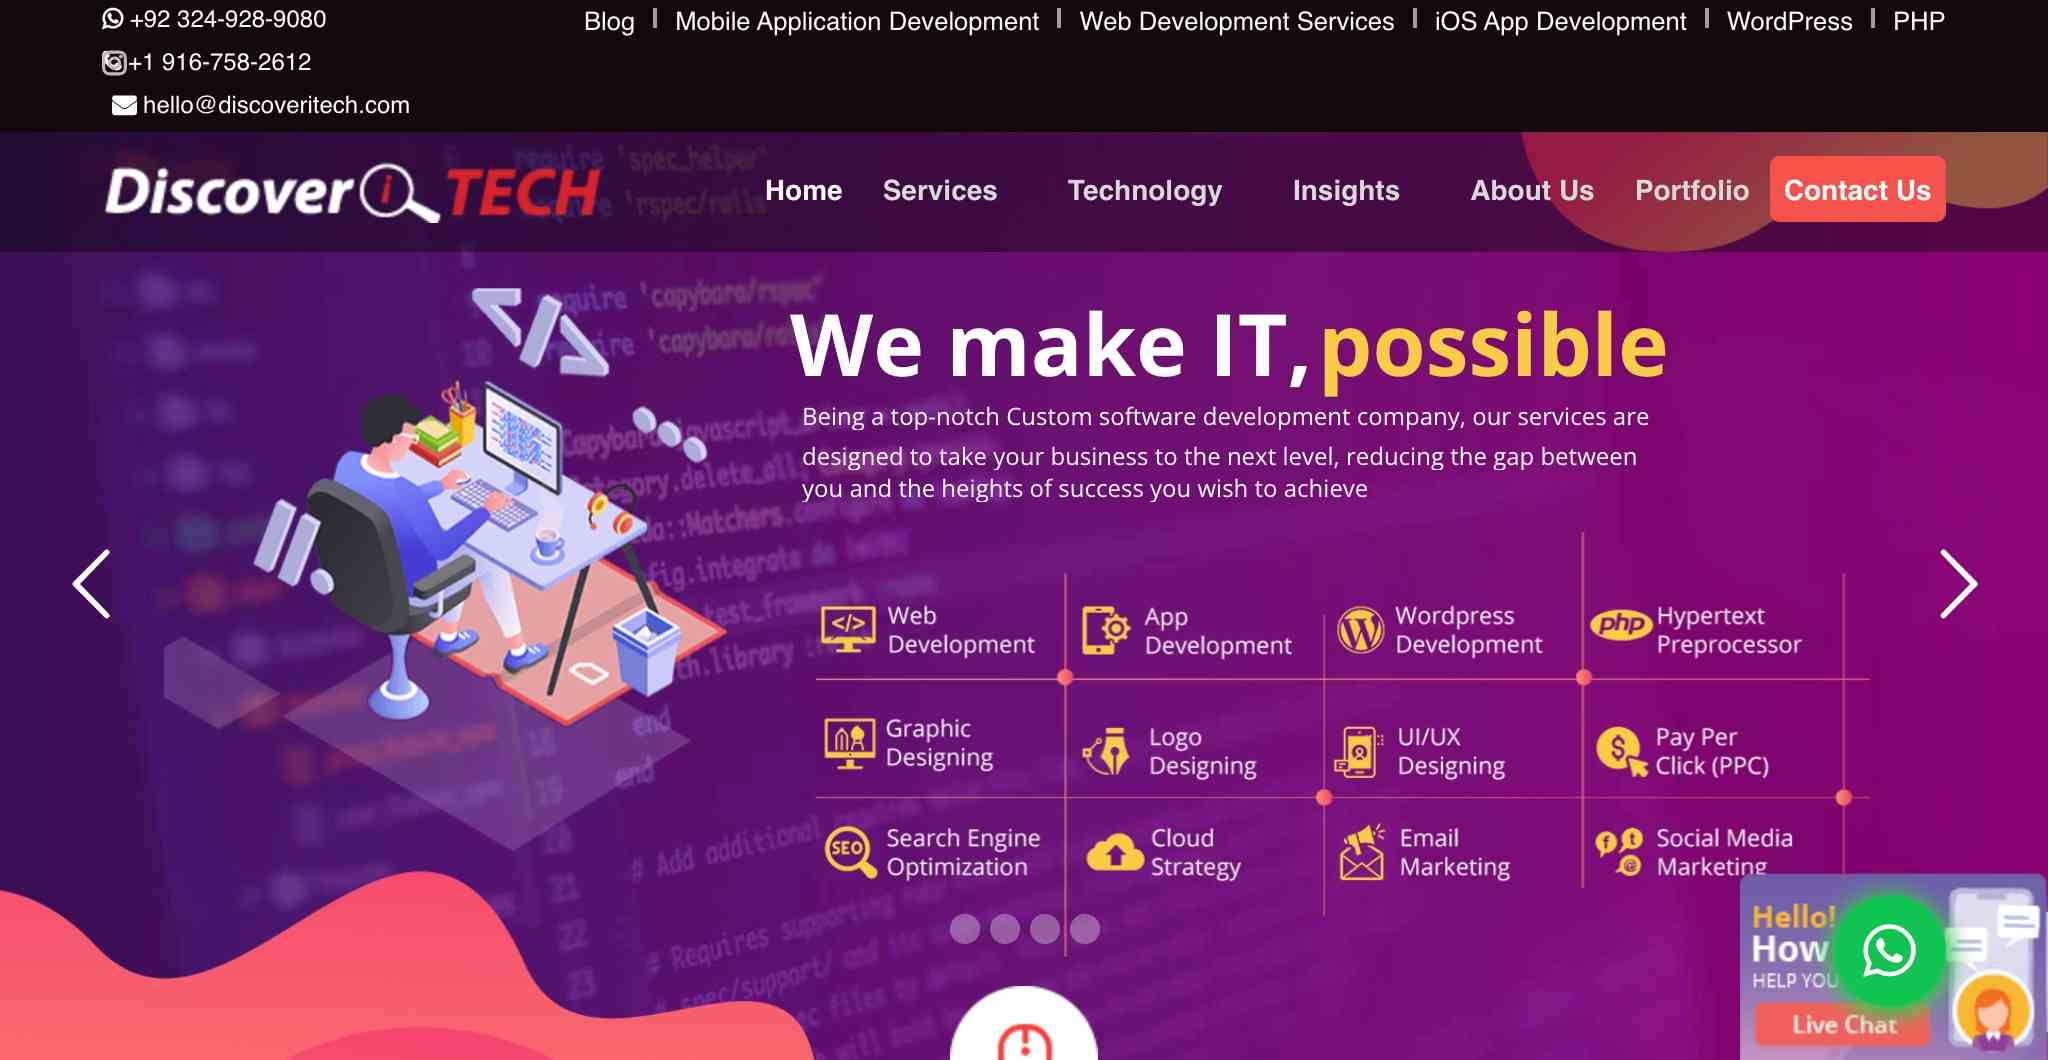 Discover Itech